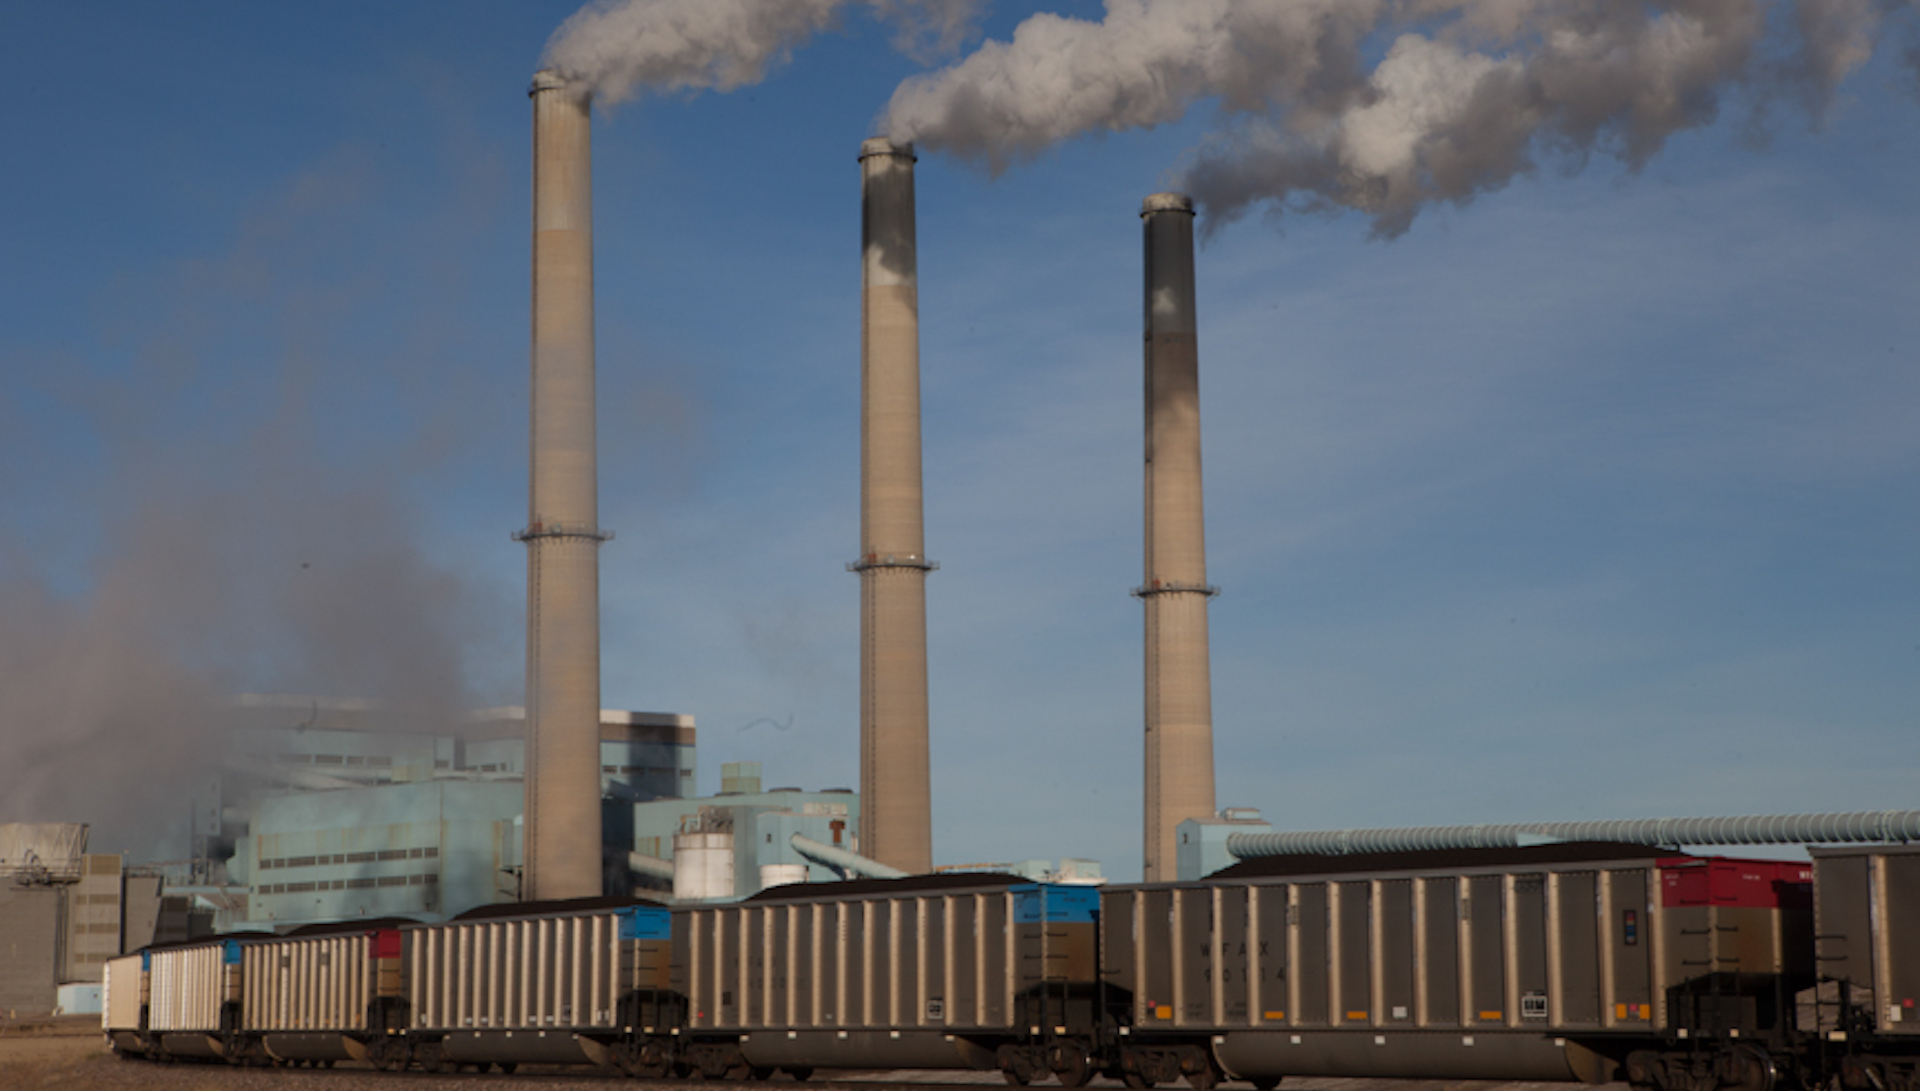 three smokestacks emit clouds with a train carrying coal underneath